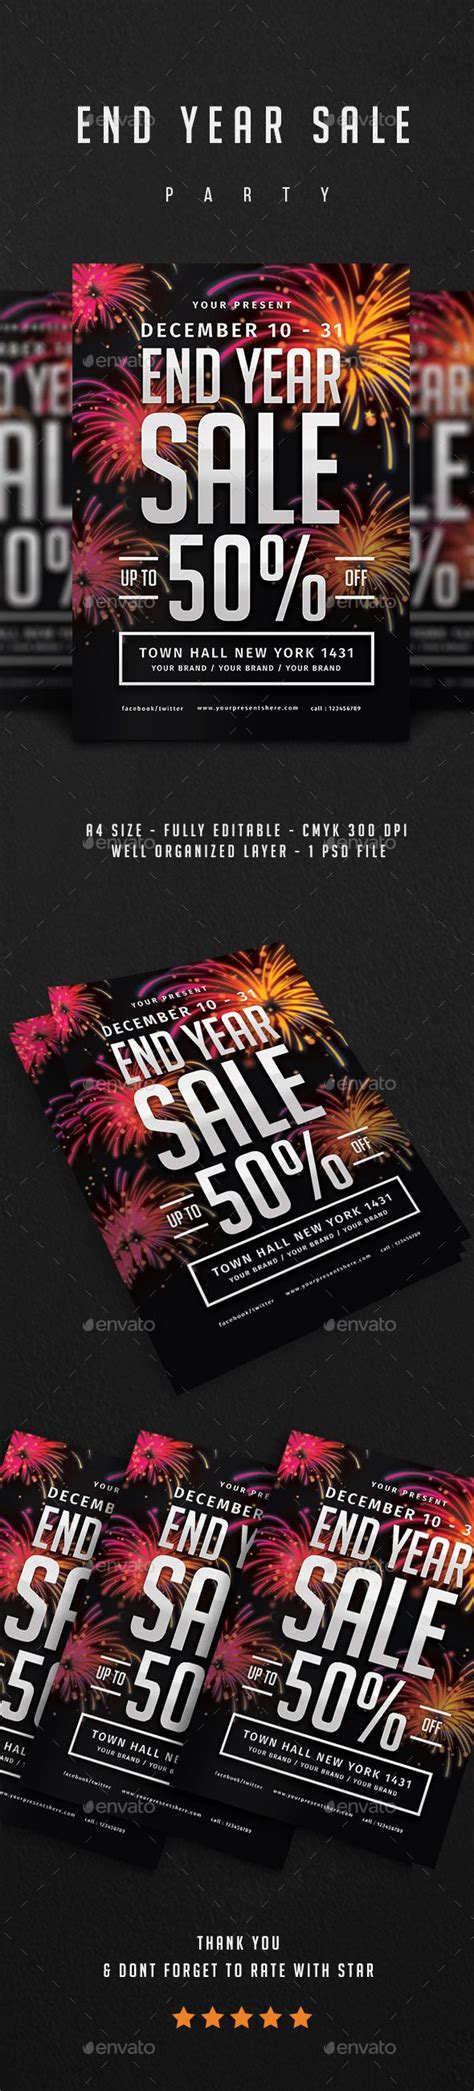 © © all rights reserved. End Year Sale Flyer | Sale flyer, Flyer, Flyer printing